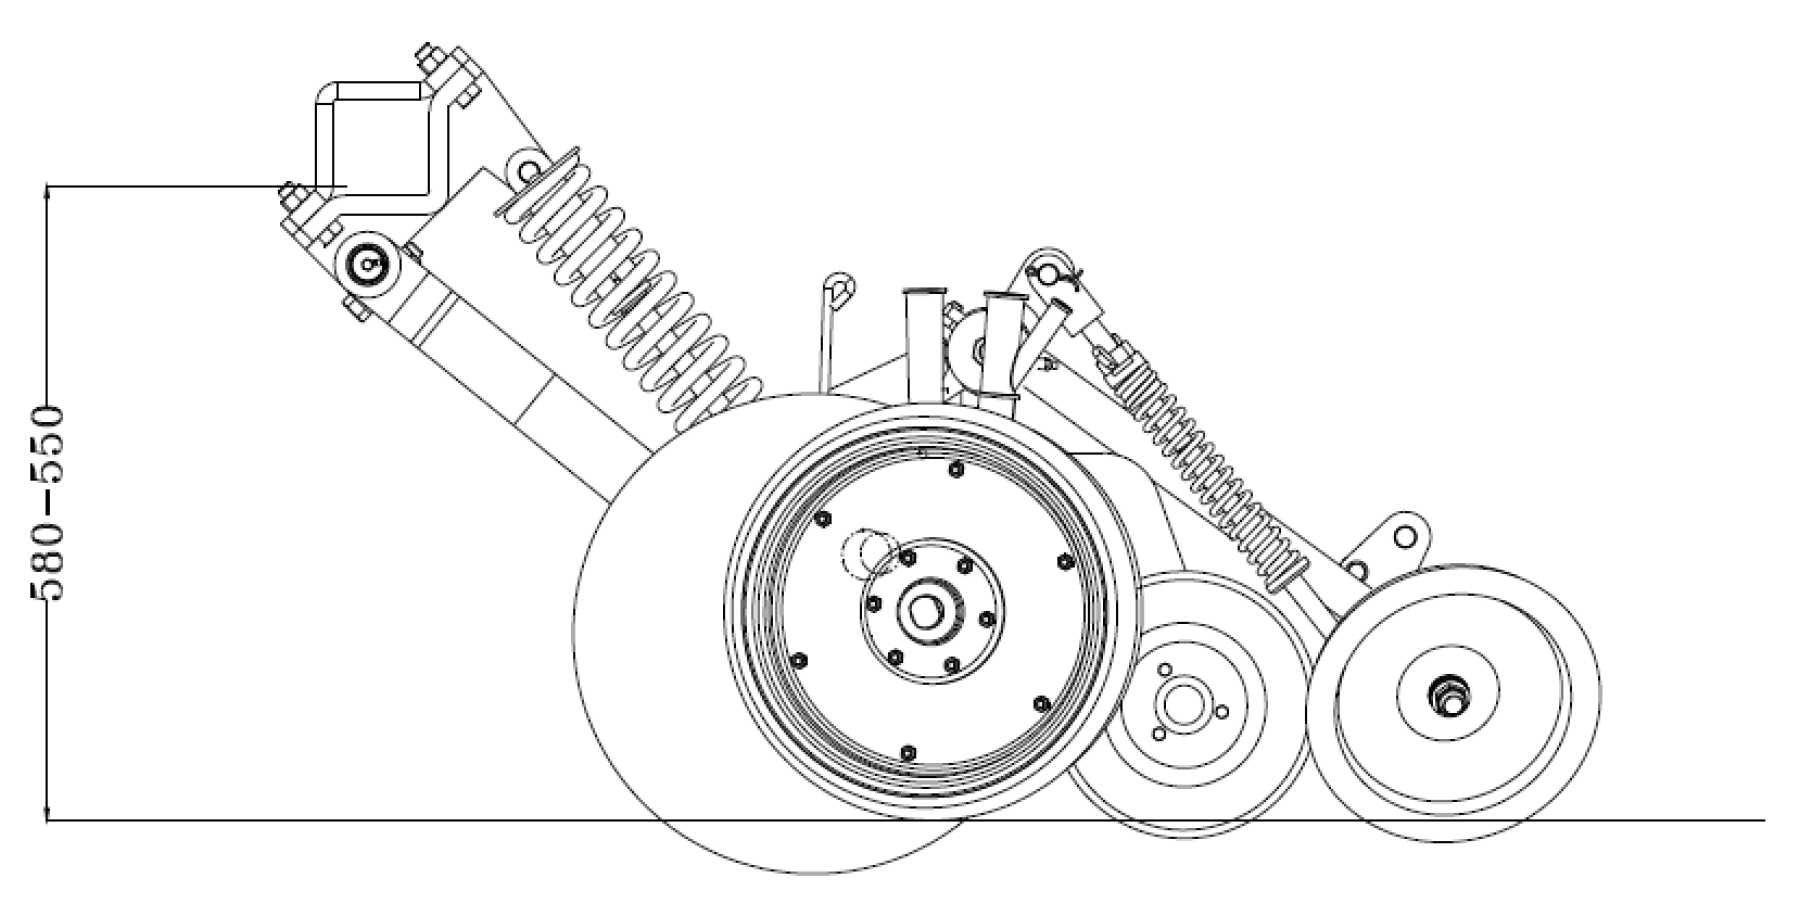 Single disc row units (Working position)